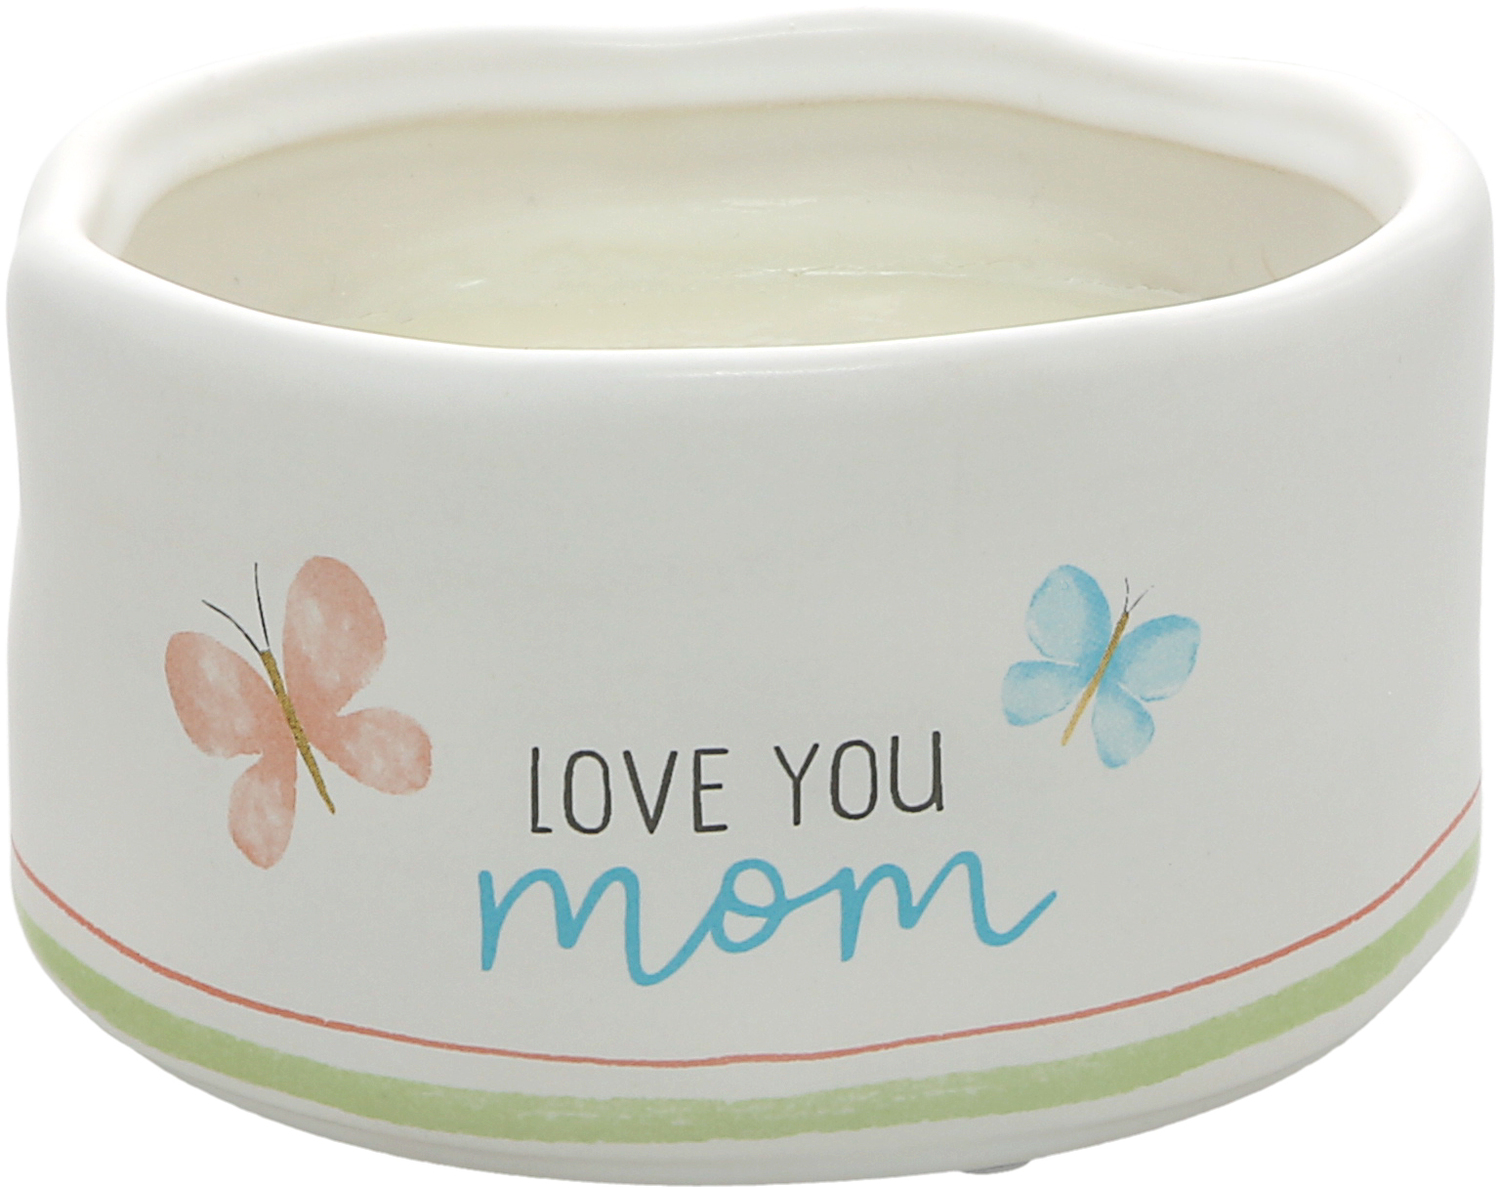 Mom by Graceful Love -BCB - Mom - 8 oz - 100% Soy Wax Reveal Candle
Scent: Tranquility